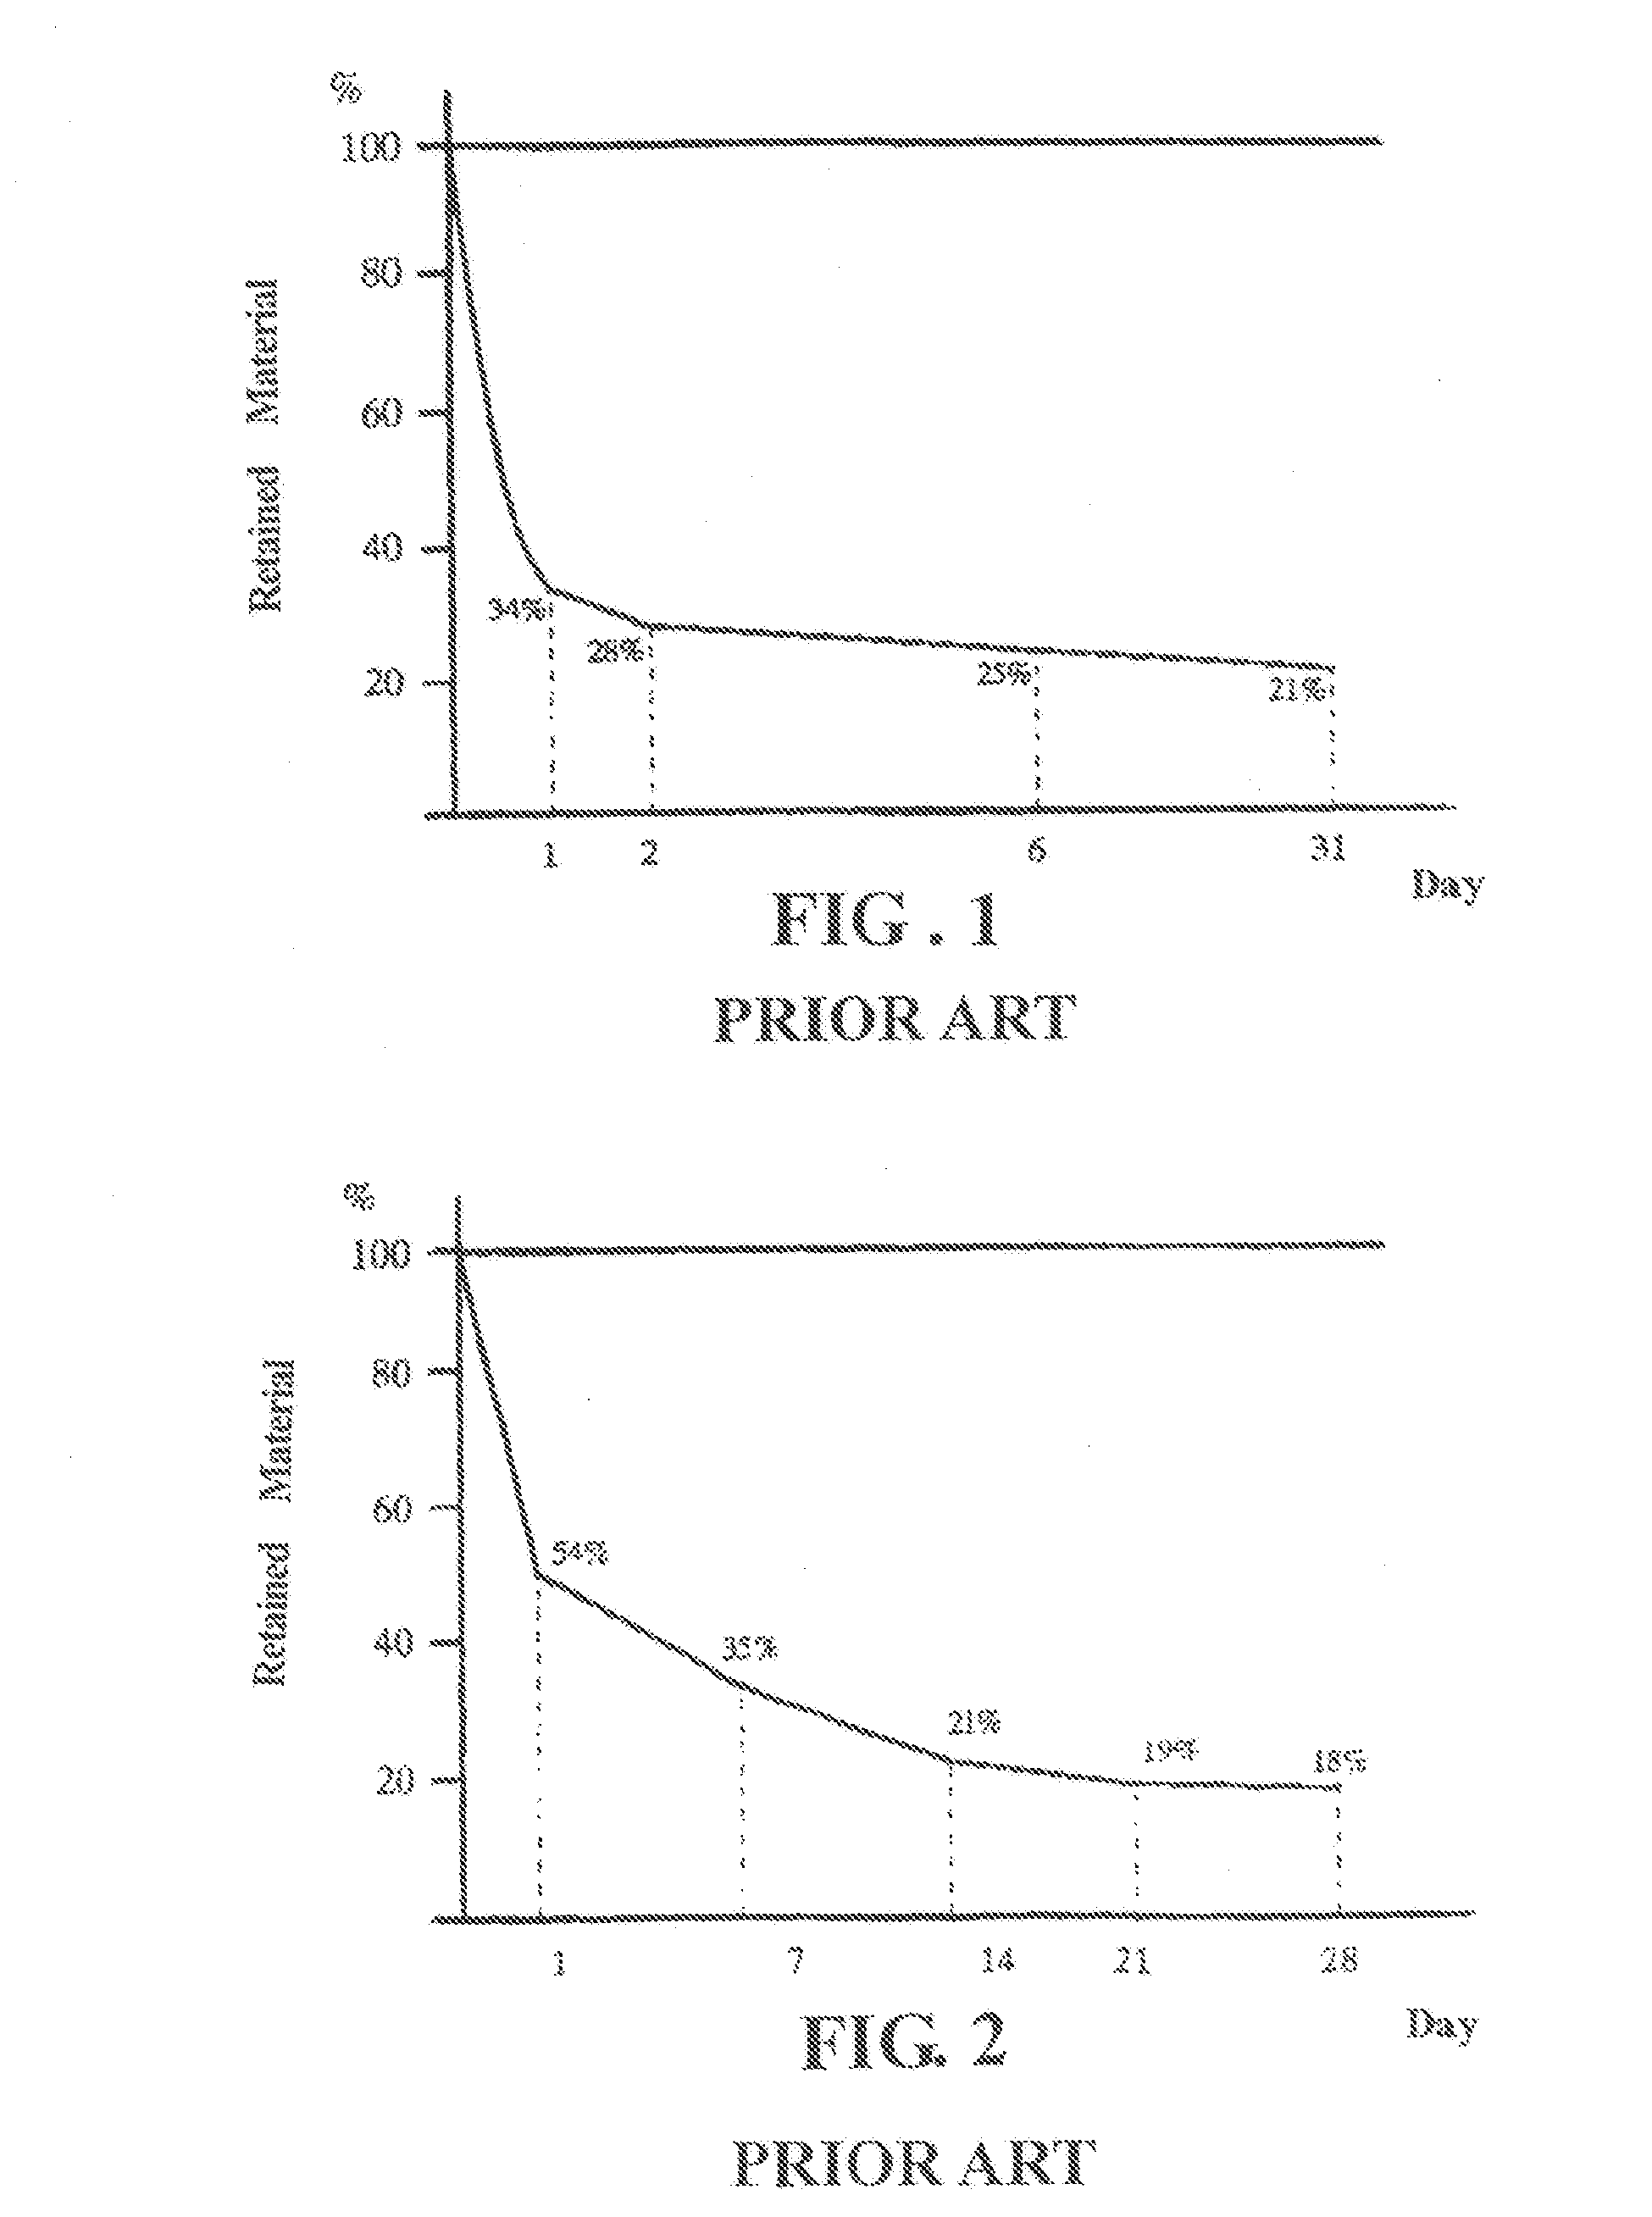 Search method for discovery of individual best study period cycle